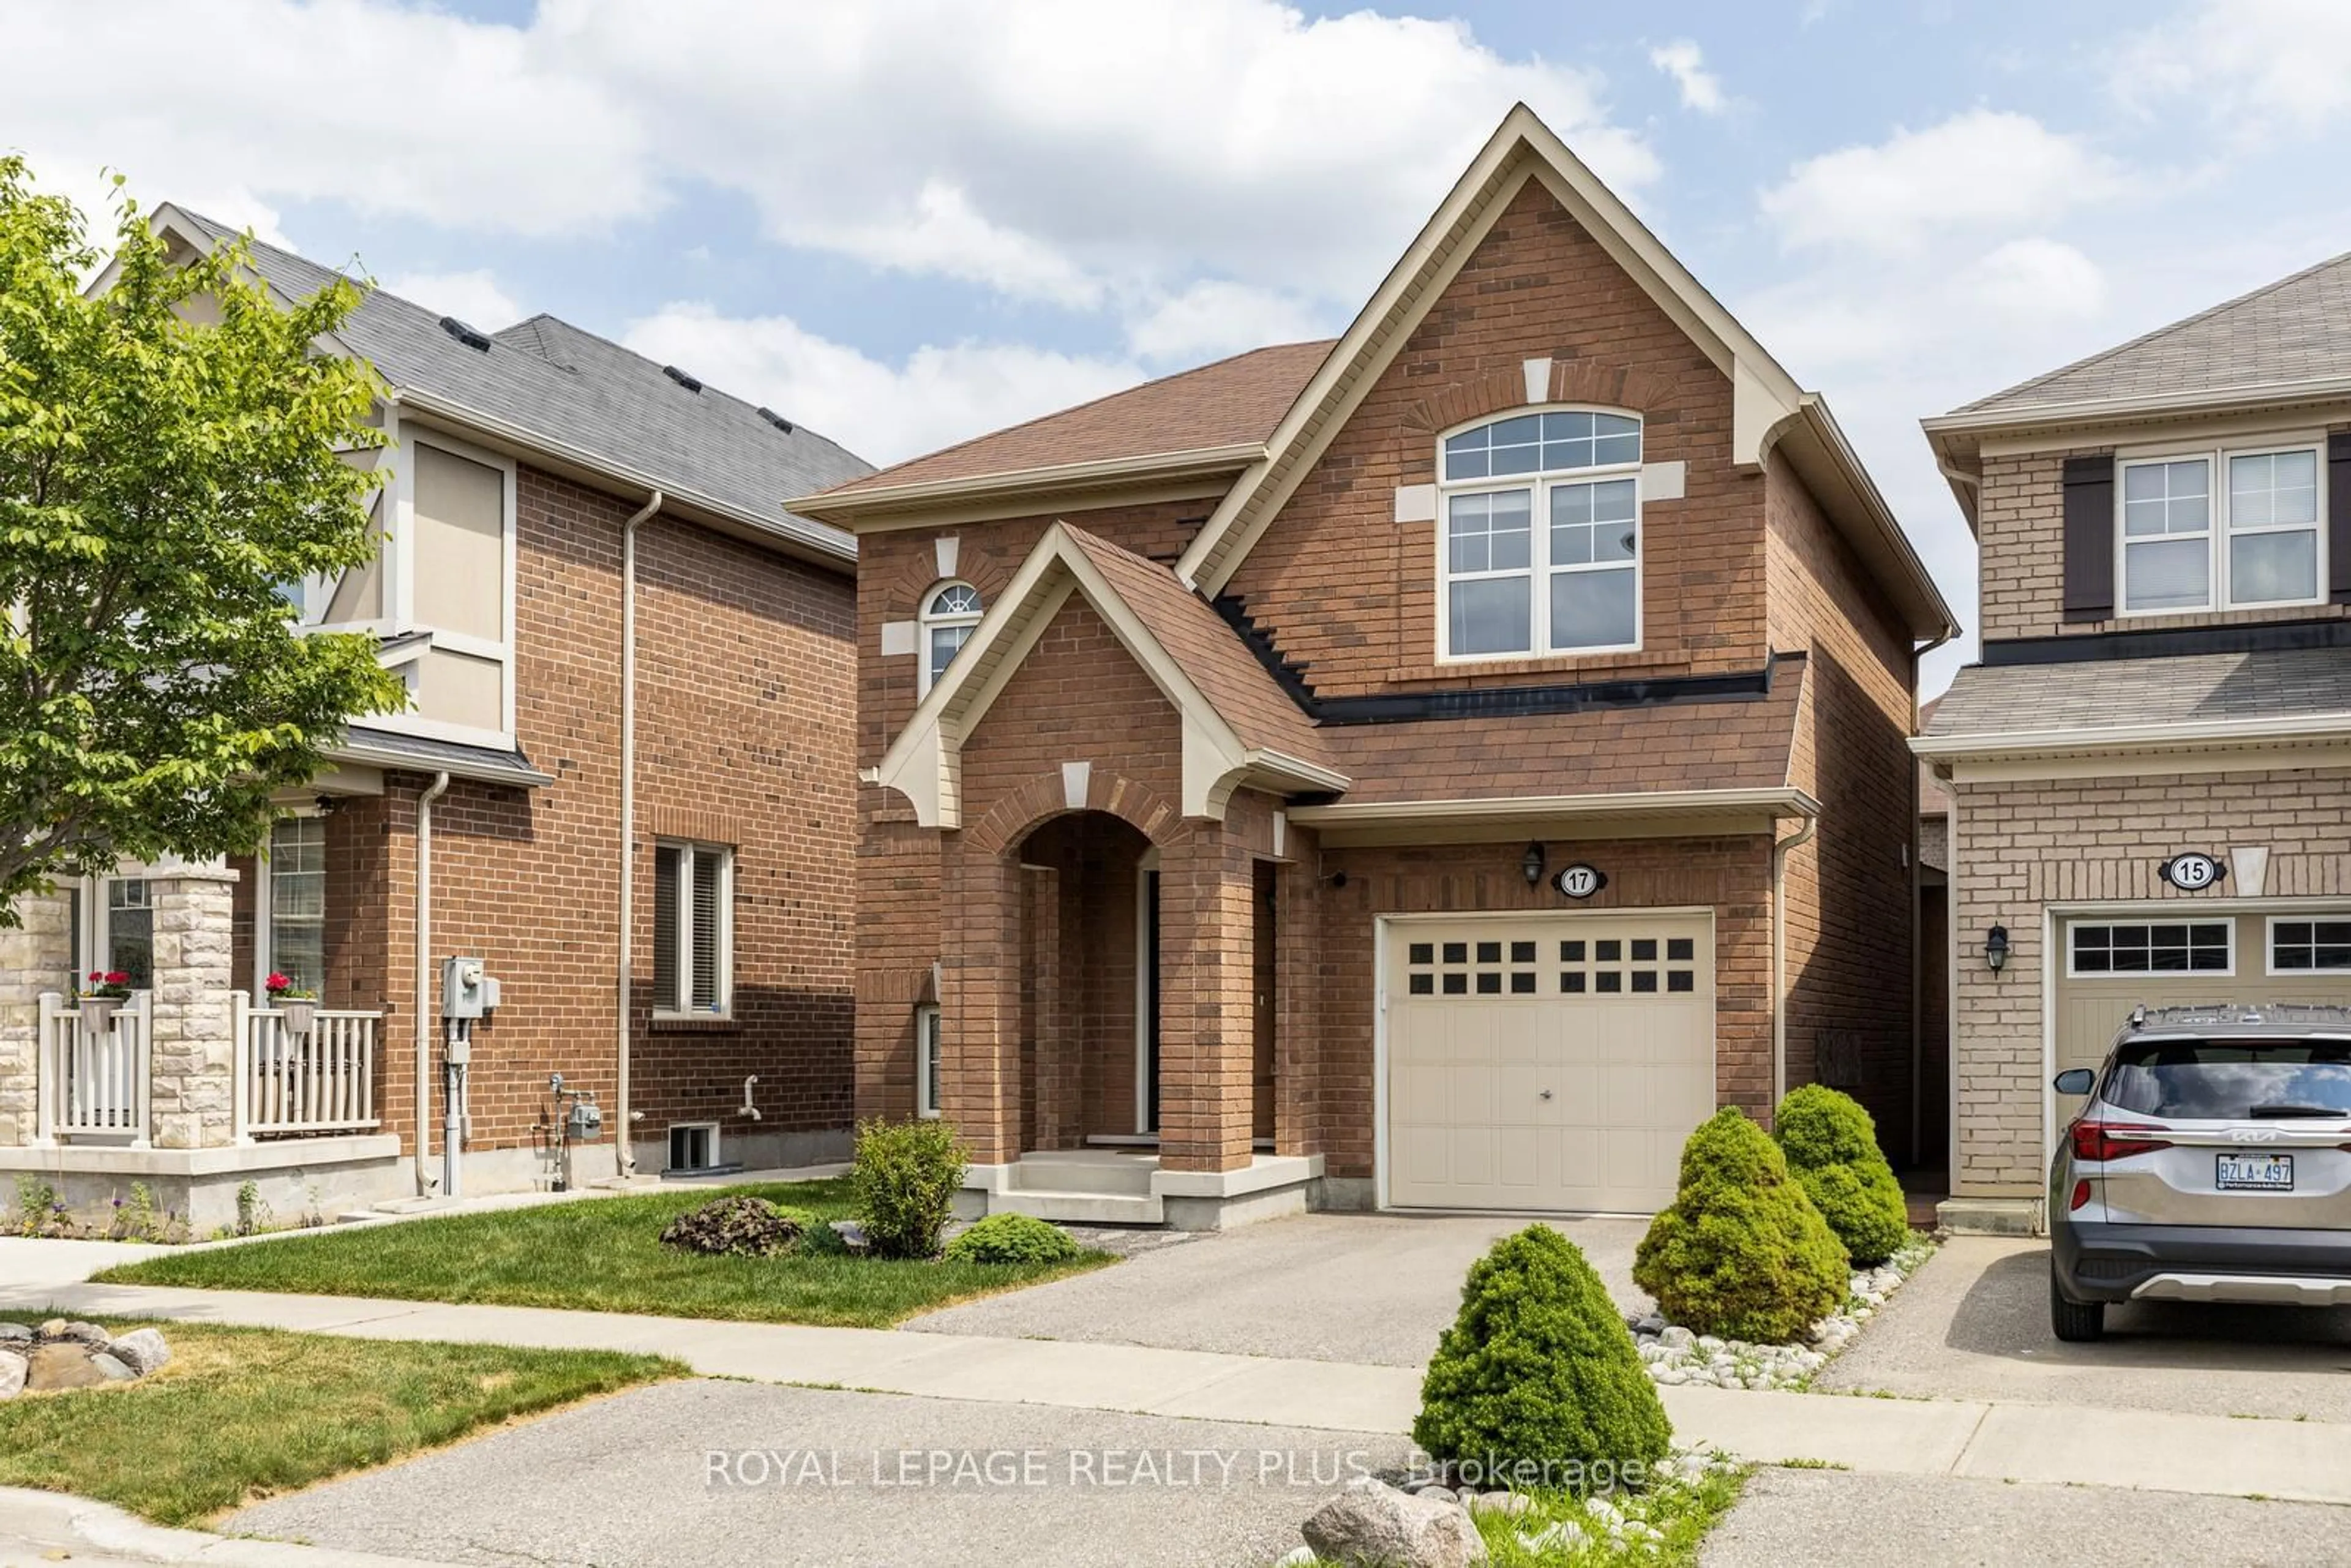 Home with brick exterior material for 17 Francis Lundy St, Brampton Ontario L6Y 4X8